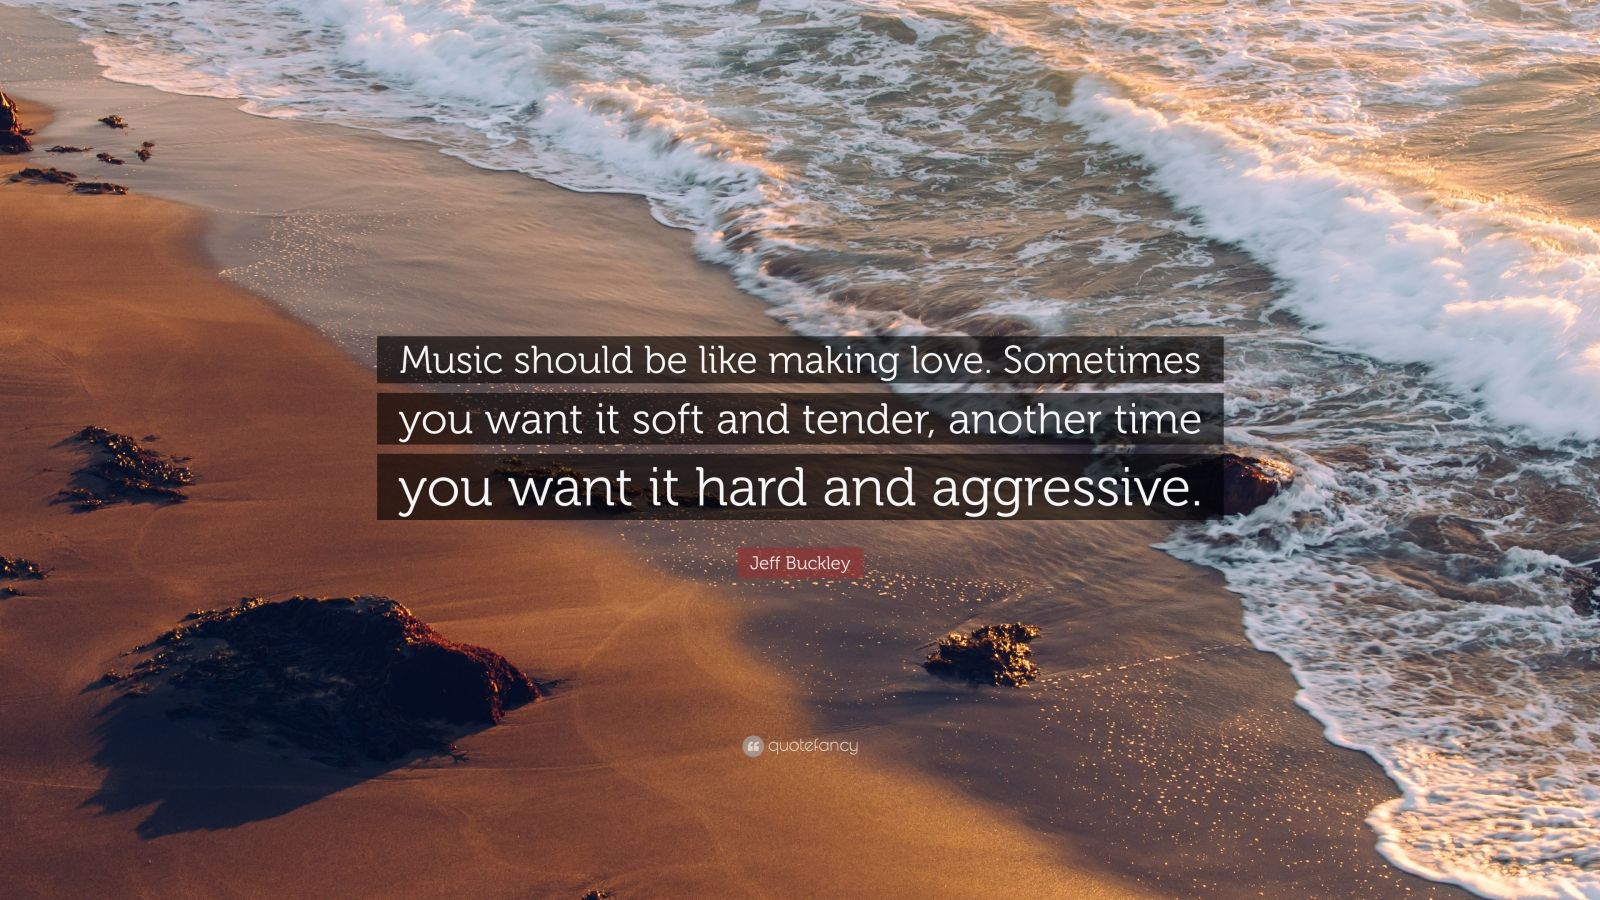 tumblr quotes about music and love